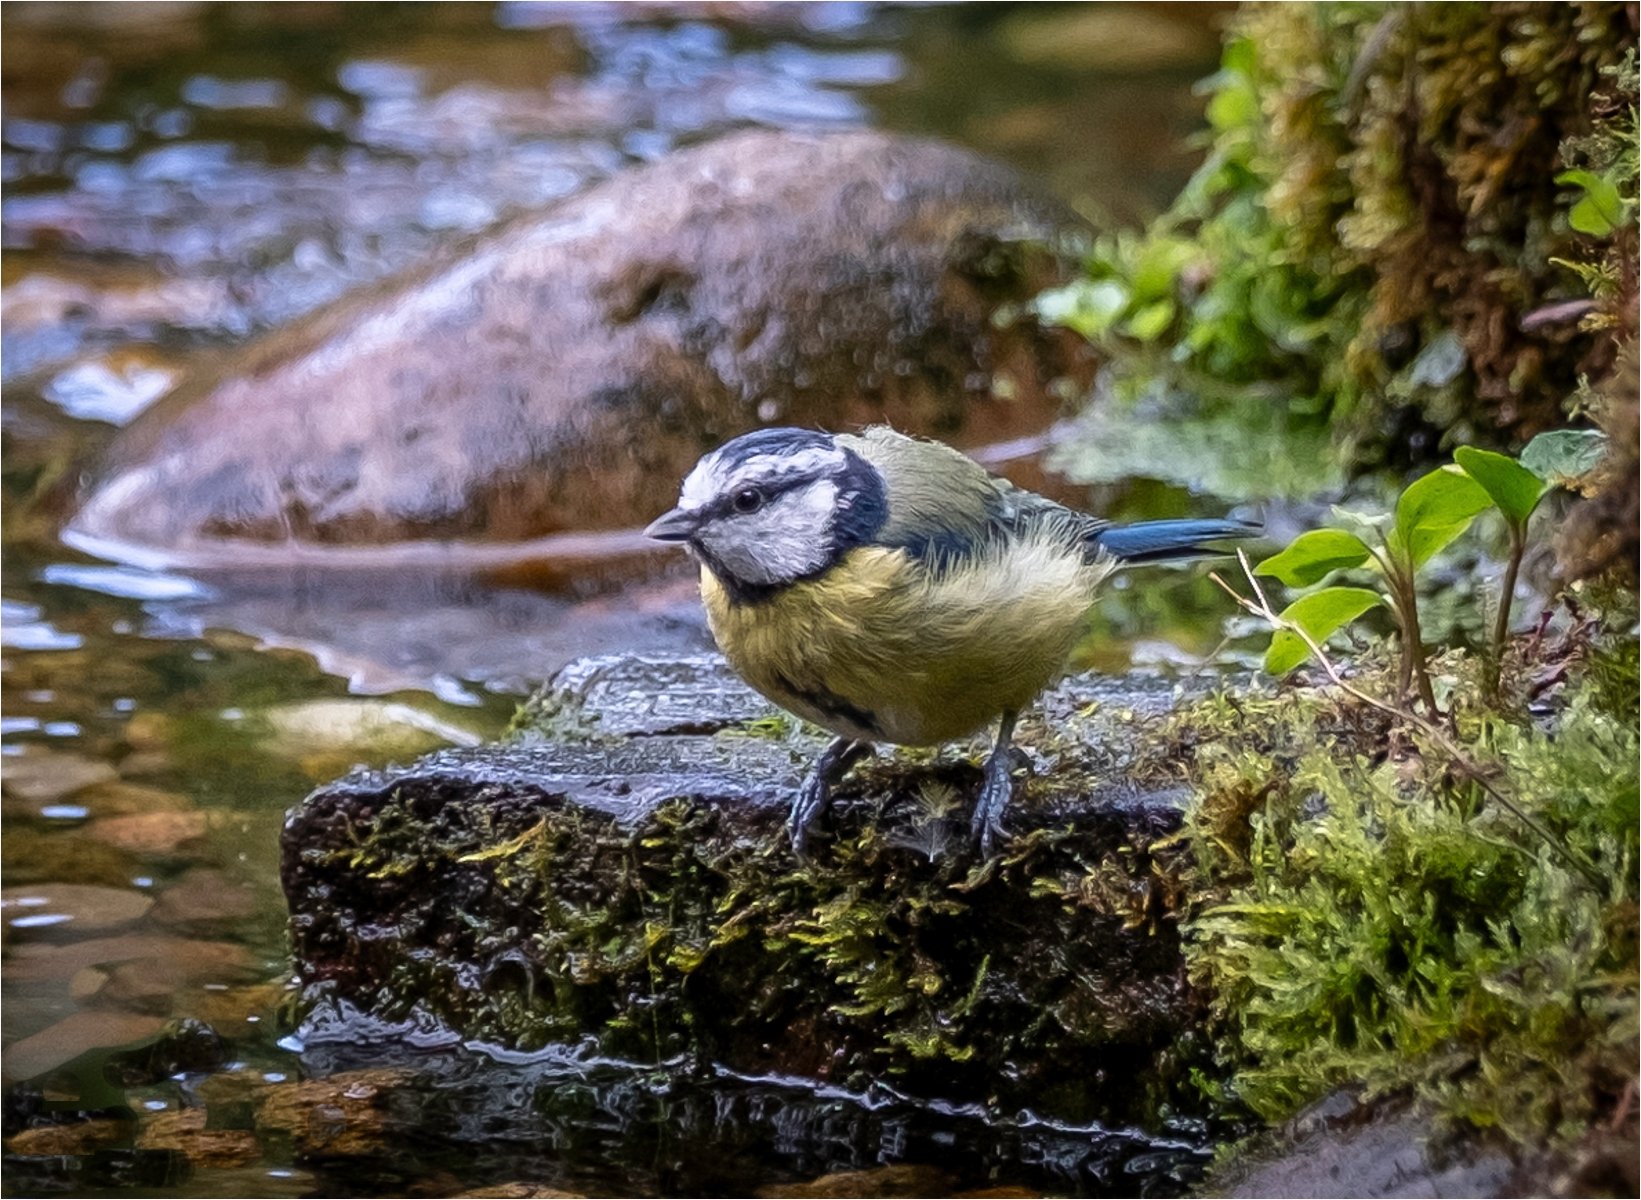 Blue Tit Contemplating a Dip by Angela Danby